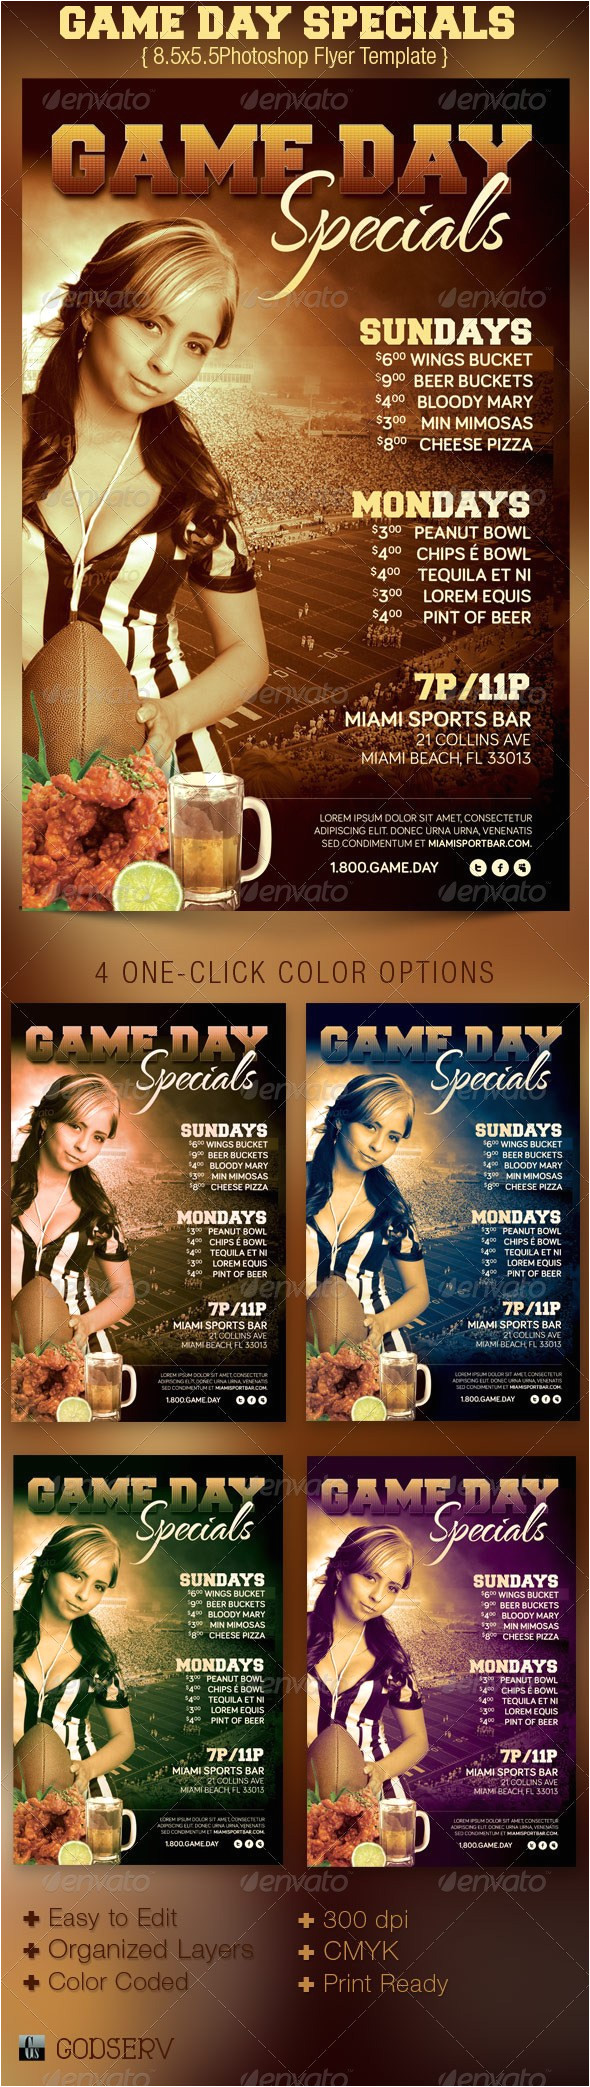 game day specials flyer template